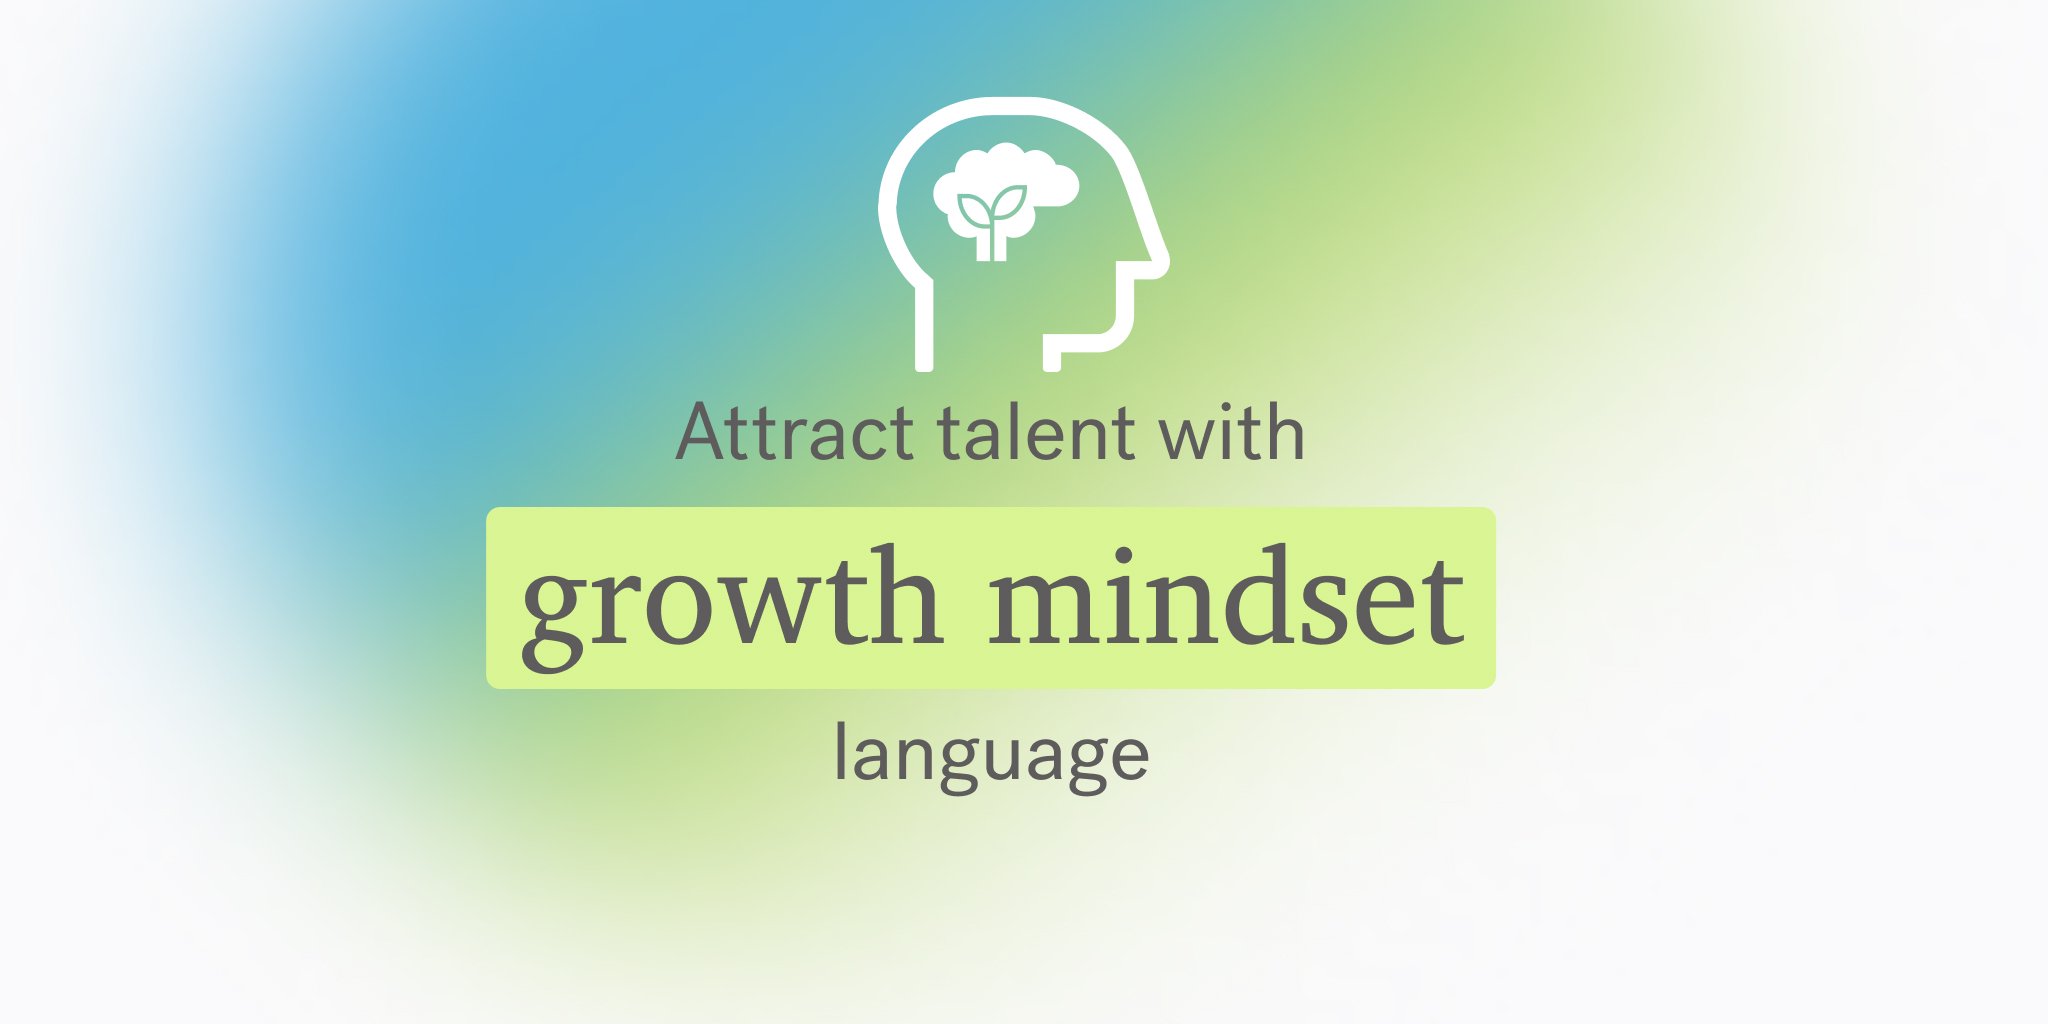 Attract talent with growth mindset language